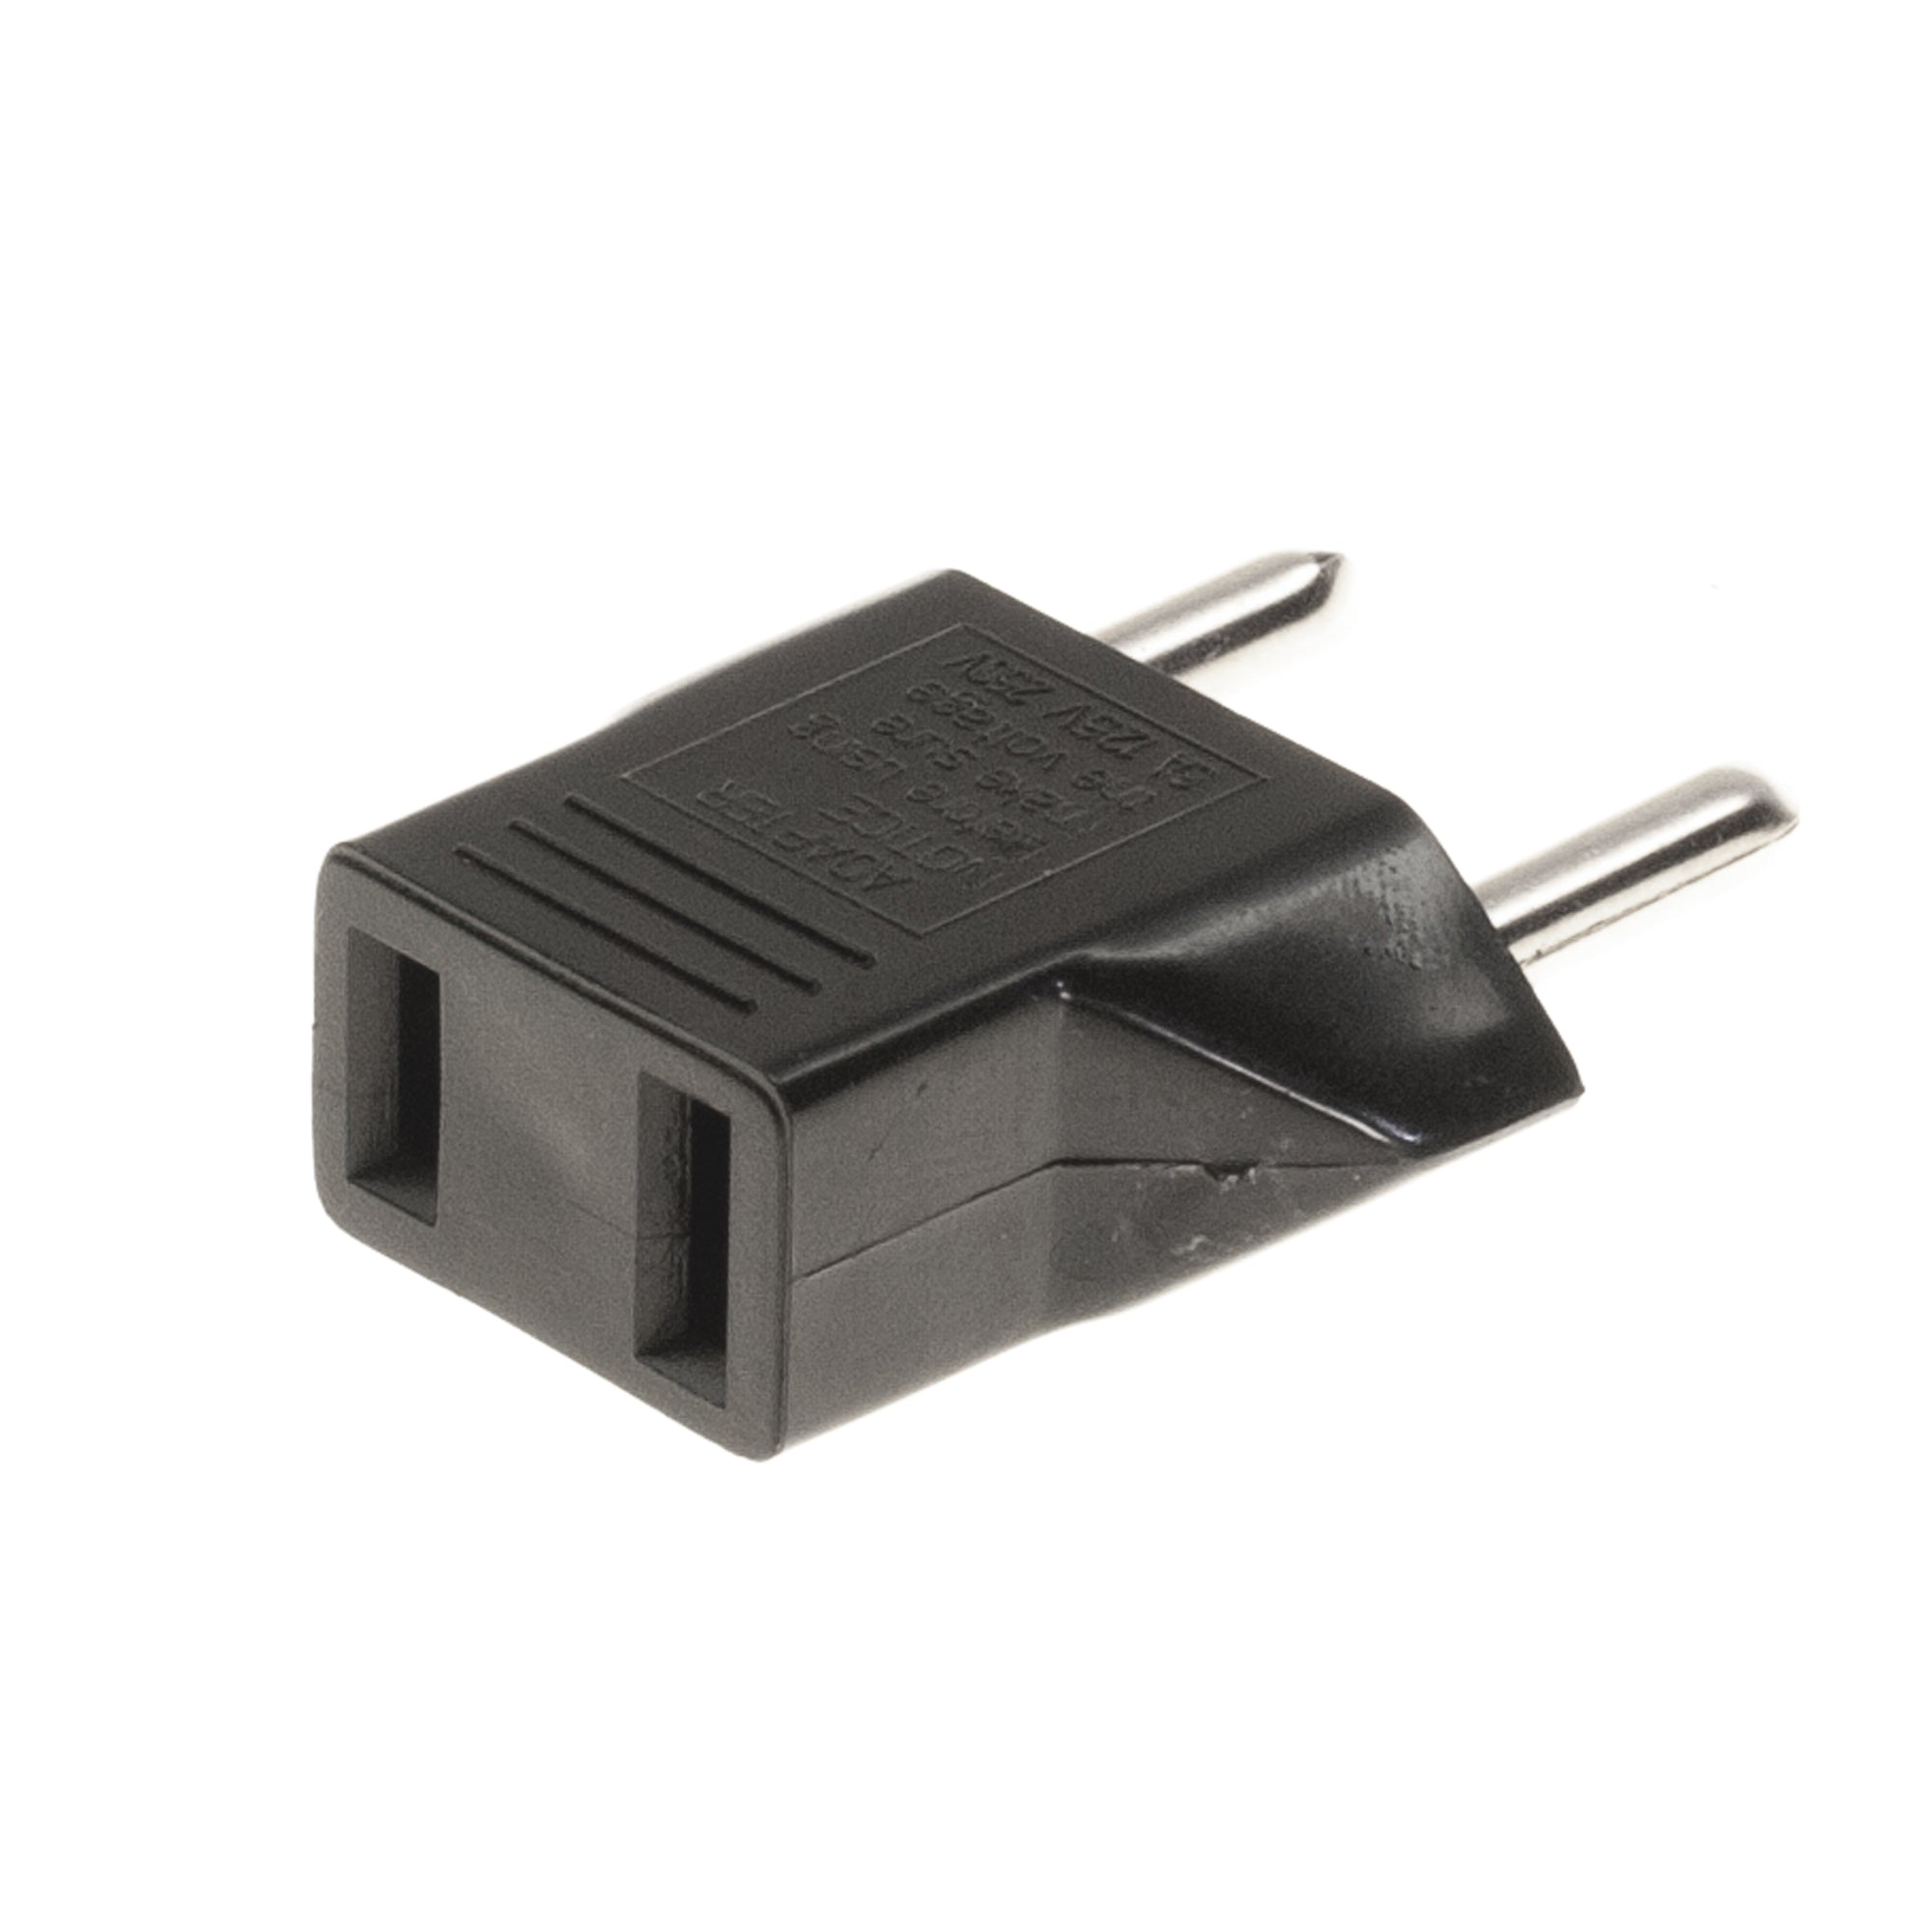 AC to DC Adapter for all Ghost Eye Wireless Video Transmission Systems